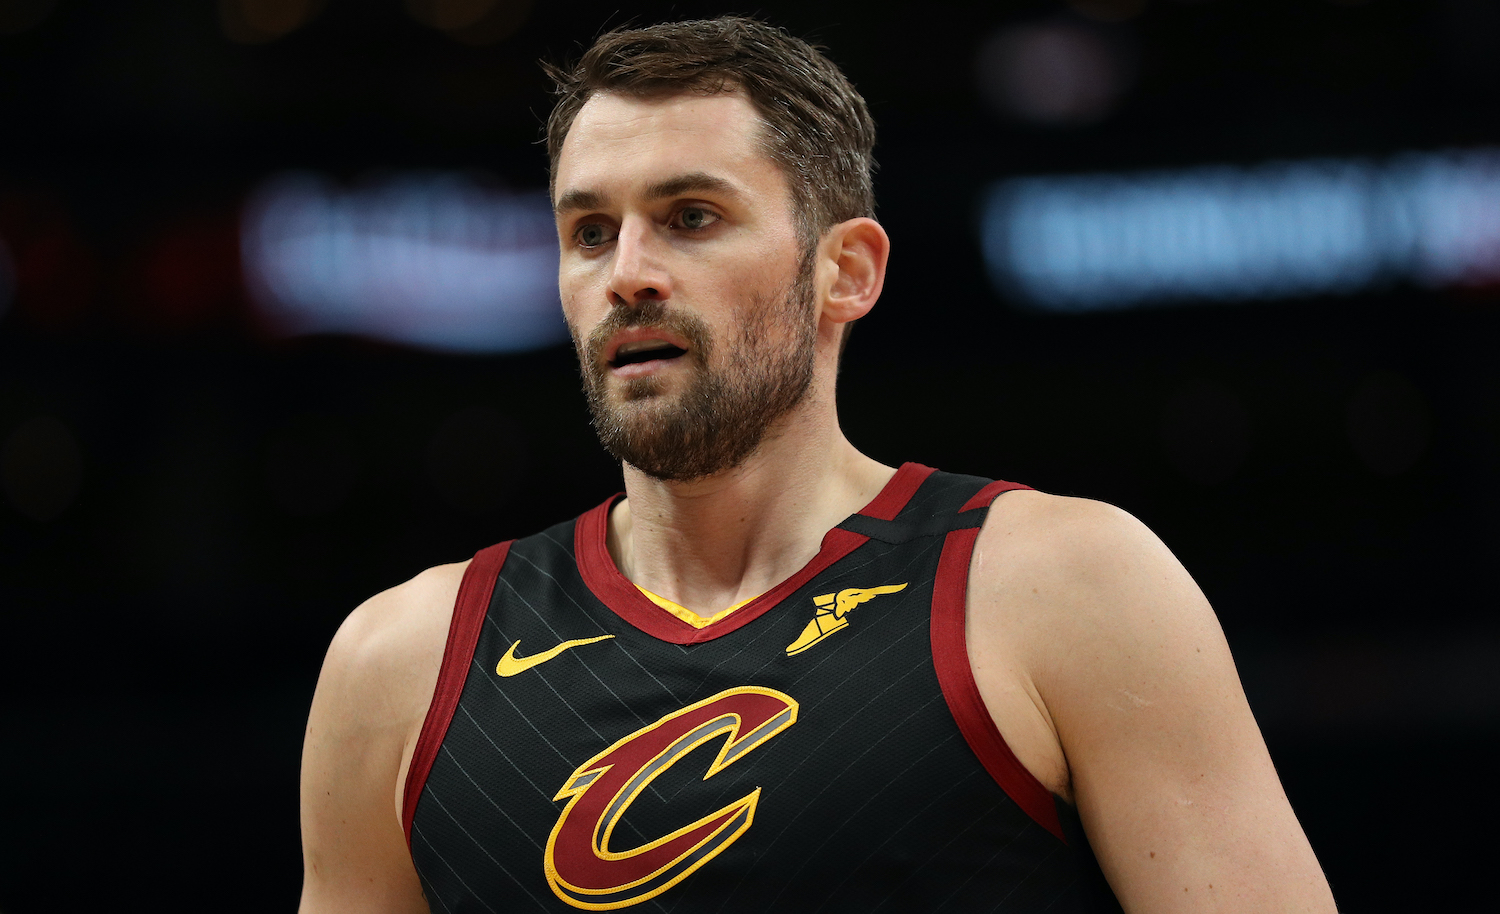 WASHINGTON, DC - FEBRUARY 21: Kevin Love #0 of the Cleveland Cavaliers looks on against the Washington Wizards at Capital One Arena on February 21, 2020 in Washington, DC. (Photo by Patrick Smith/Getty Images)